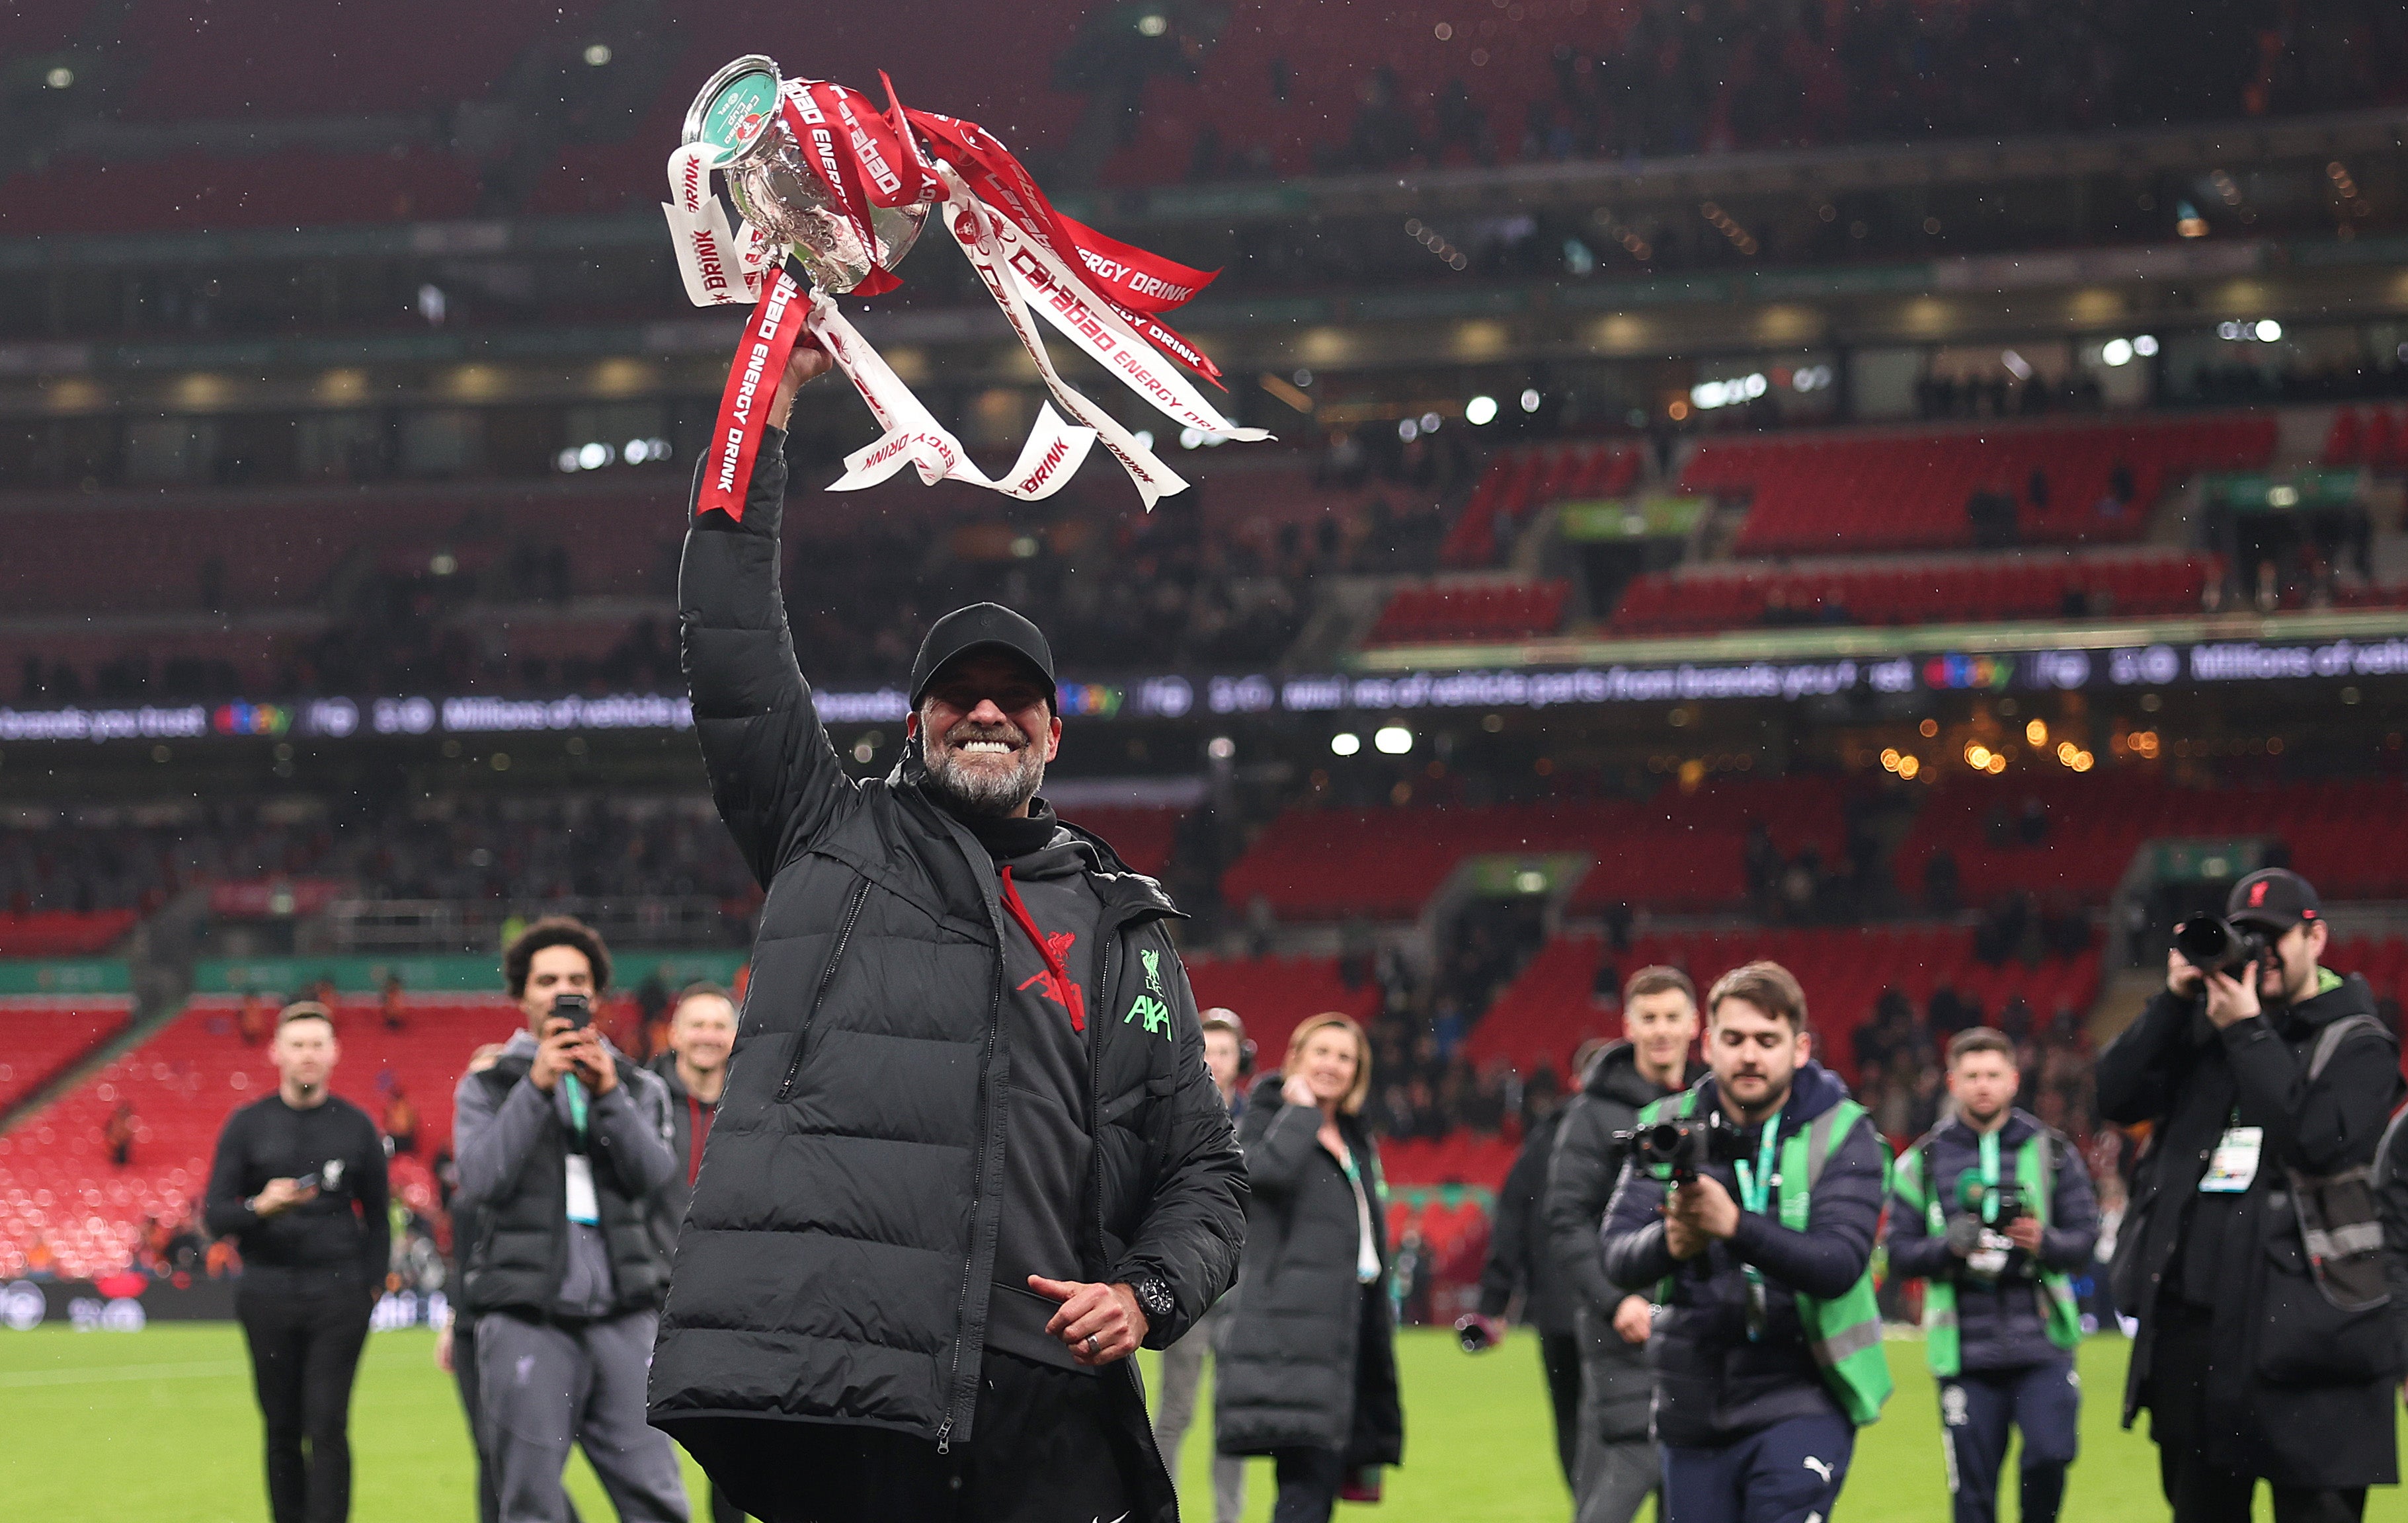 jurgen klopp may not get a golden swansong but his exit comes at the right time